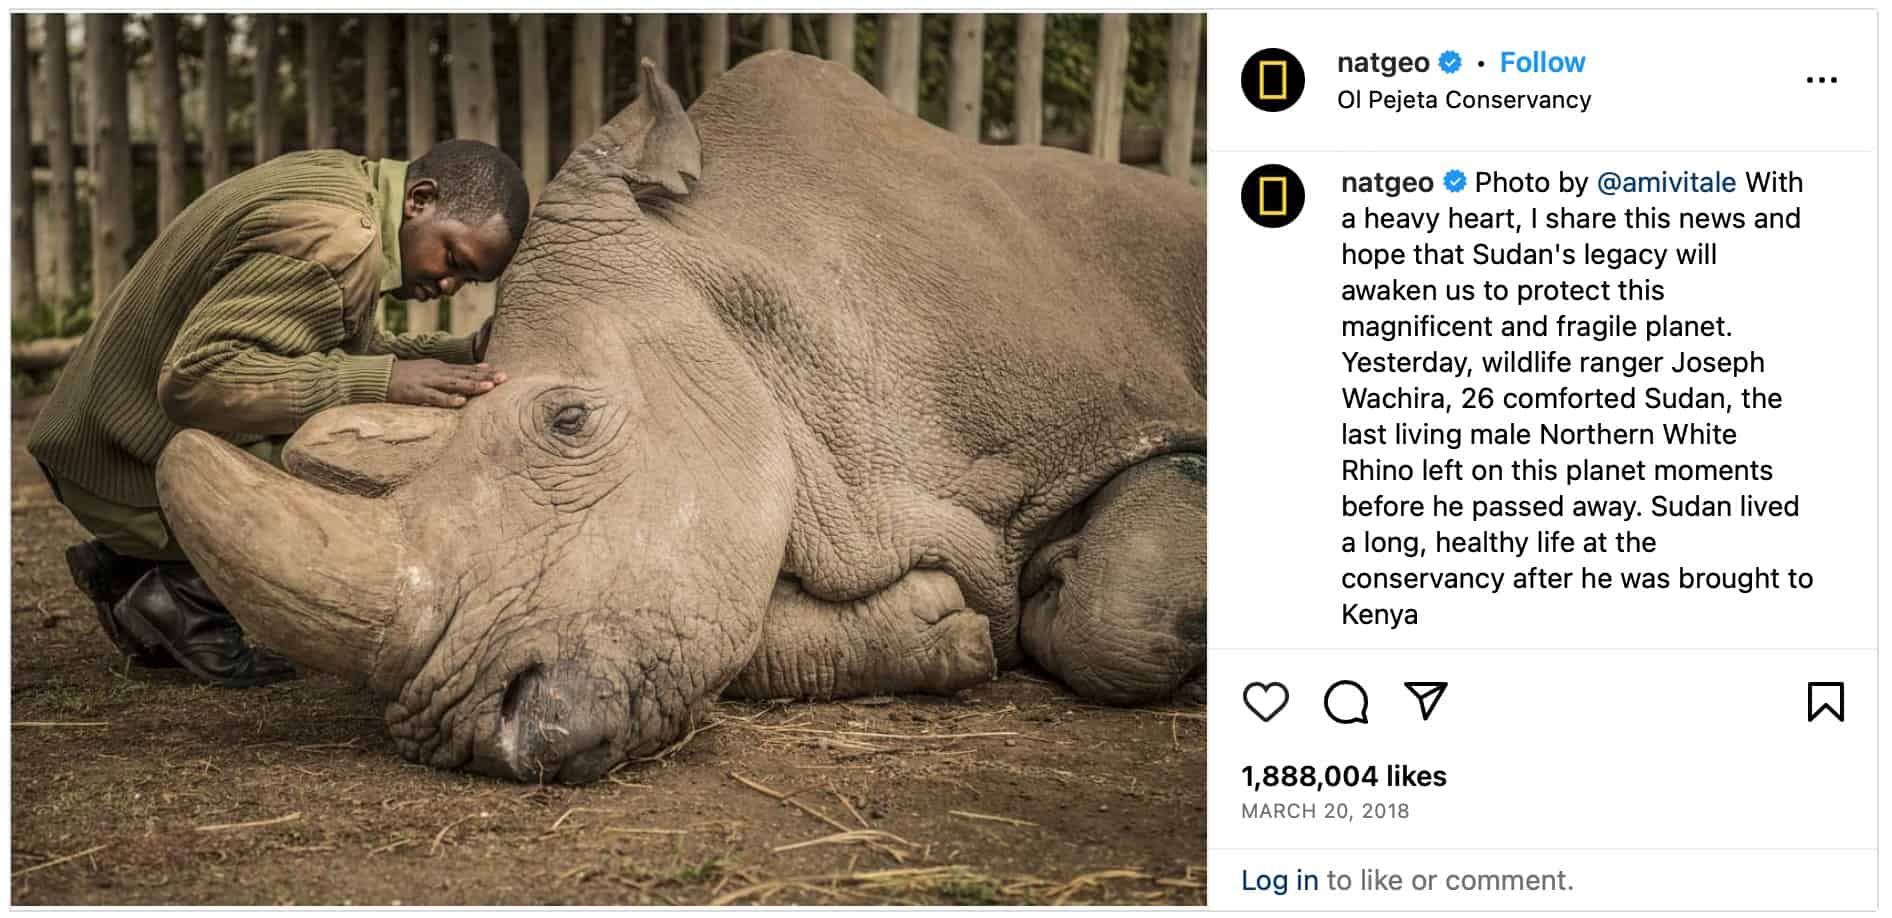 National Geographic's post about the last rhino of its kind.